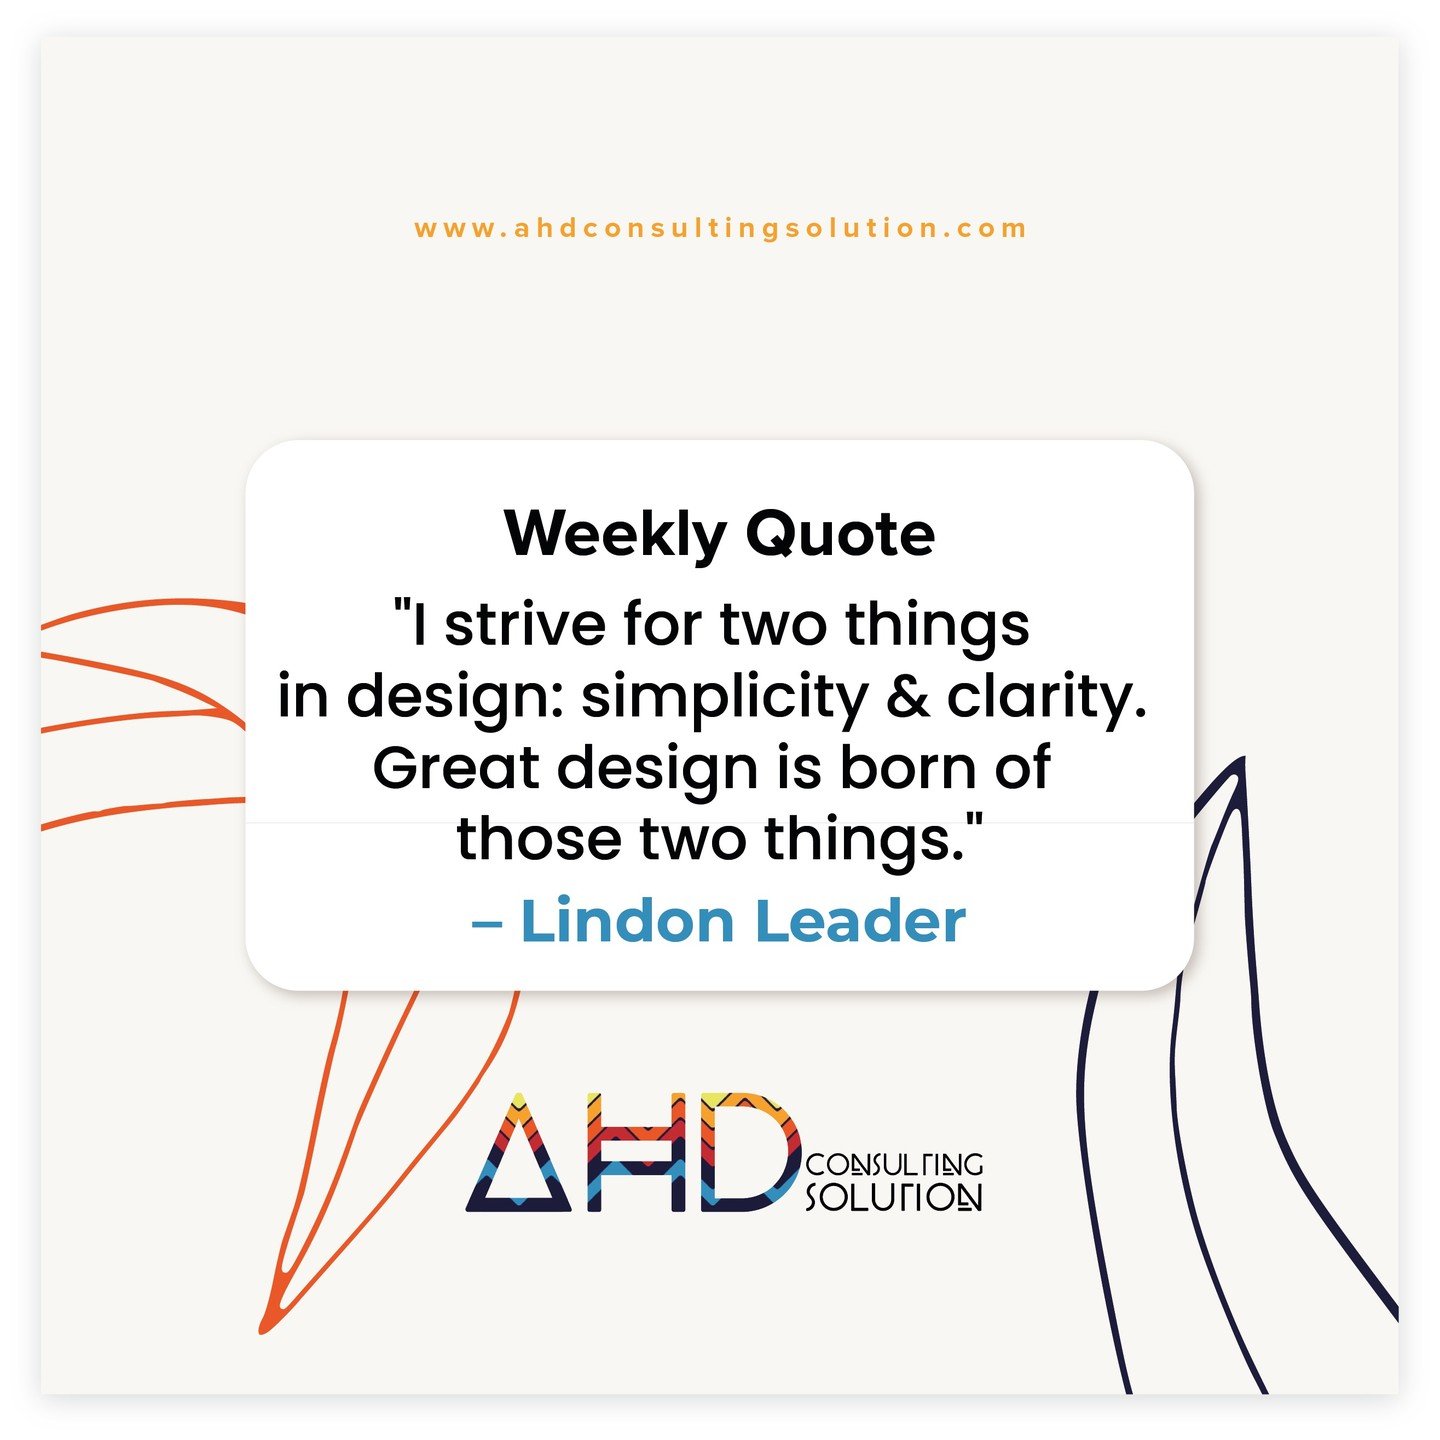 I strive for two things in design: simplicity and clarity. Great design is born of those two things.
#tuesdayquote #insight